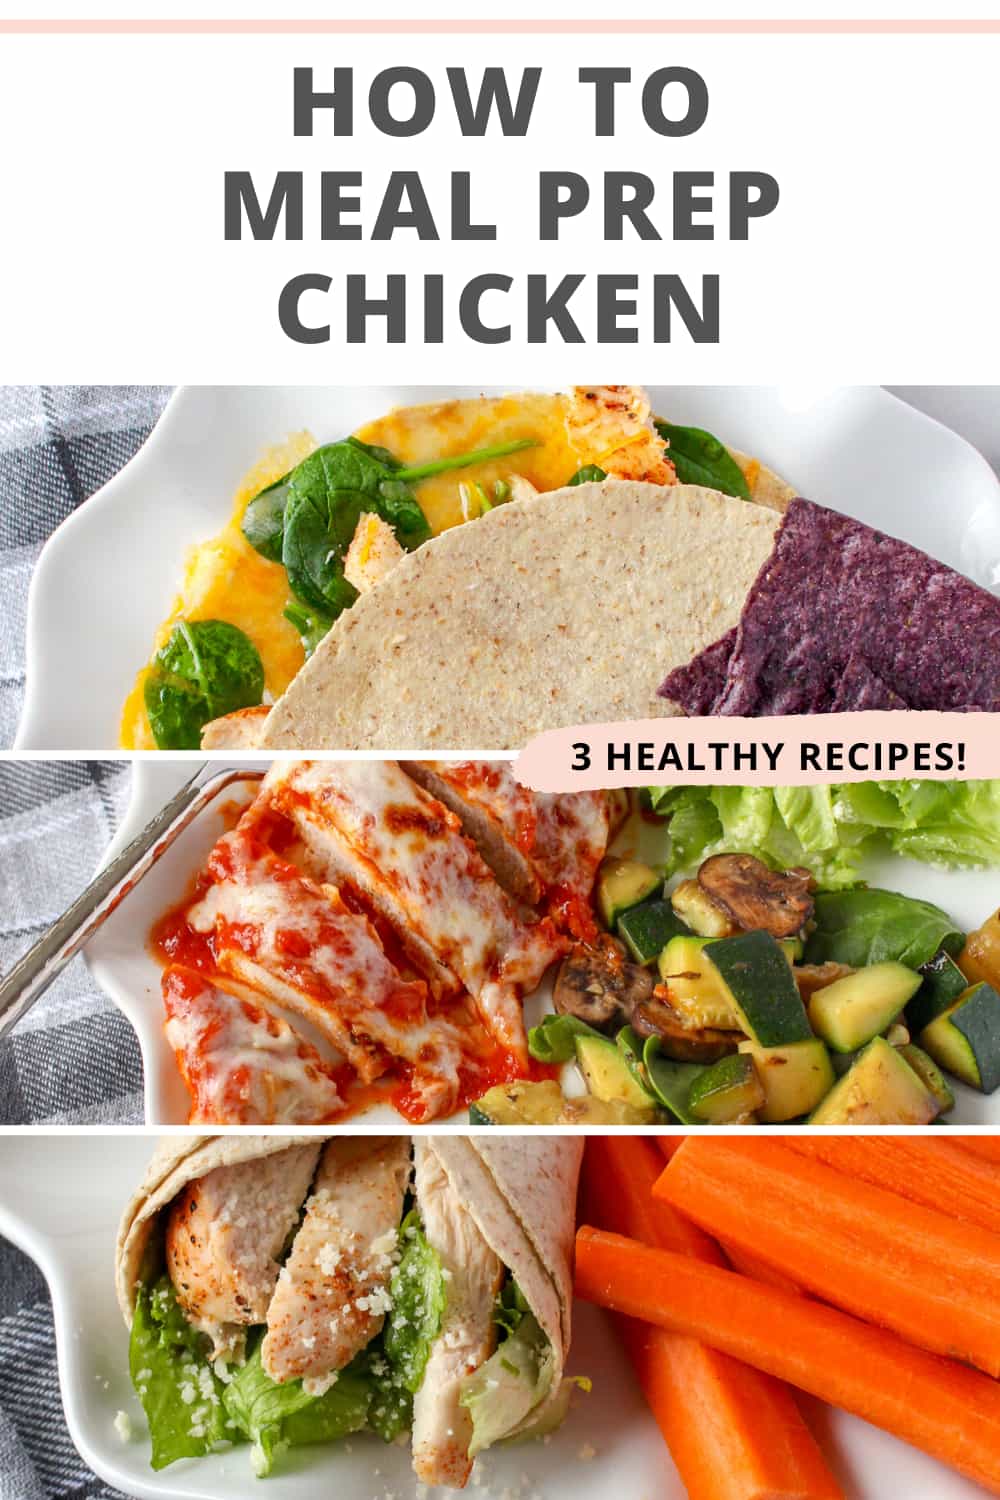 How to Meal Prep Chicken | Healthy Dinner Recipes by Chelsey Amer